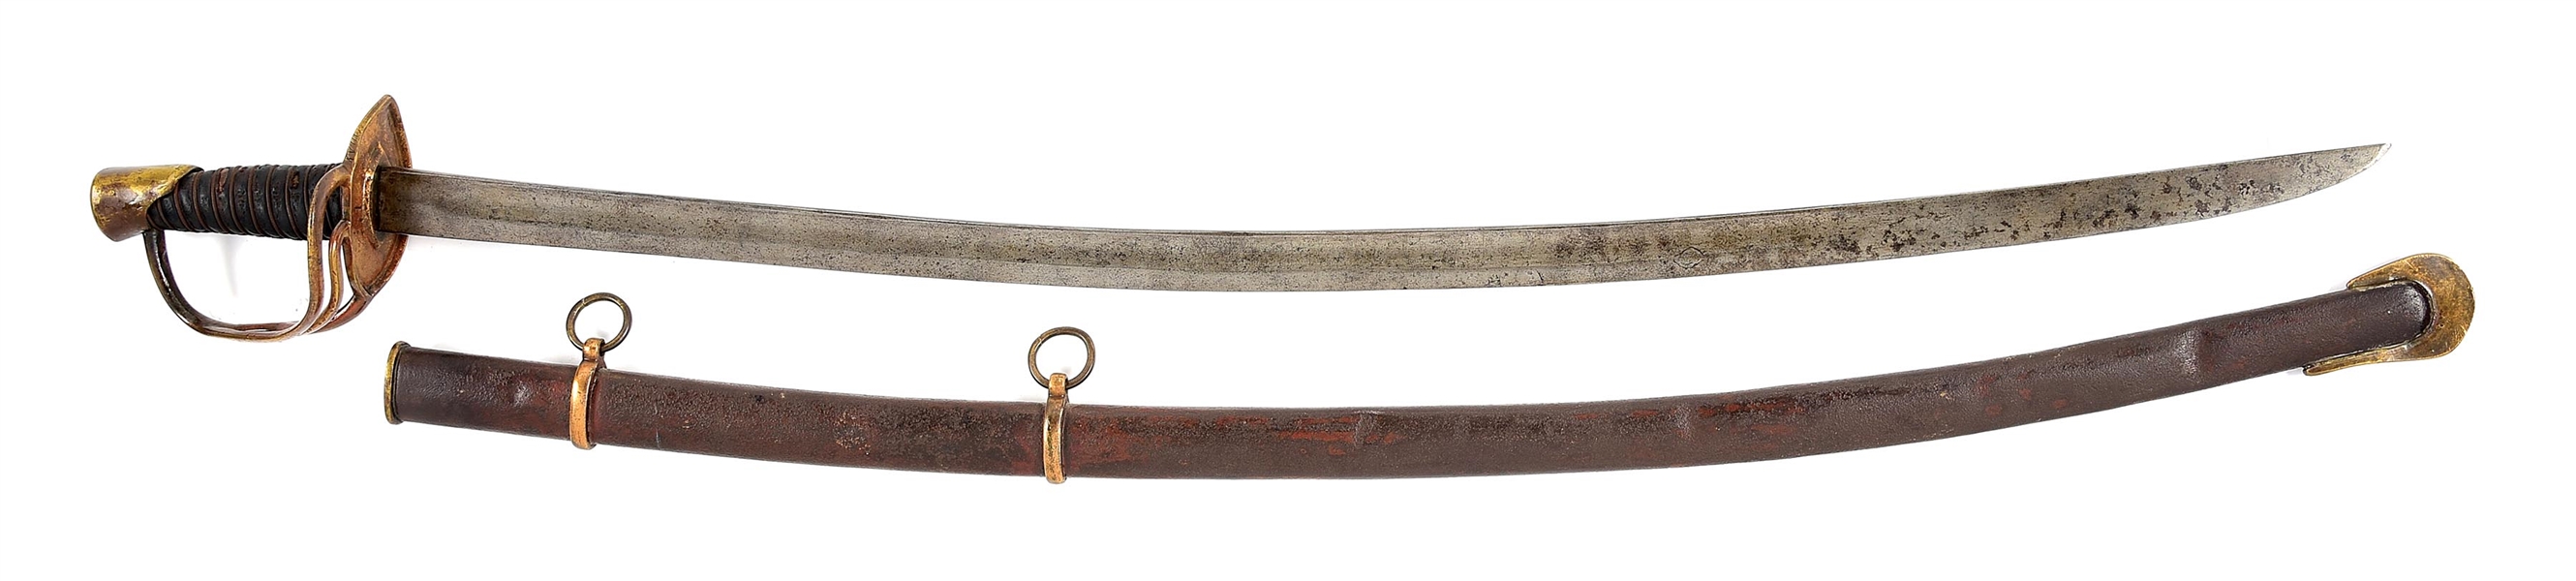 LOUIS FROELICH CAVALRY SABER ATTRIBUTED TO CHARLES E. GROGAN, 1ST MARYLAND INFANTRY, WOUNDED AND CAPTURED AT PICKETT’S CHARGE, APPOINTED LIEUTENANT IN MOSBY’S RANGERS.